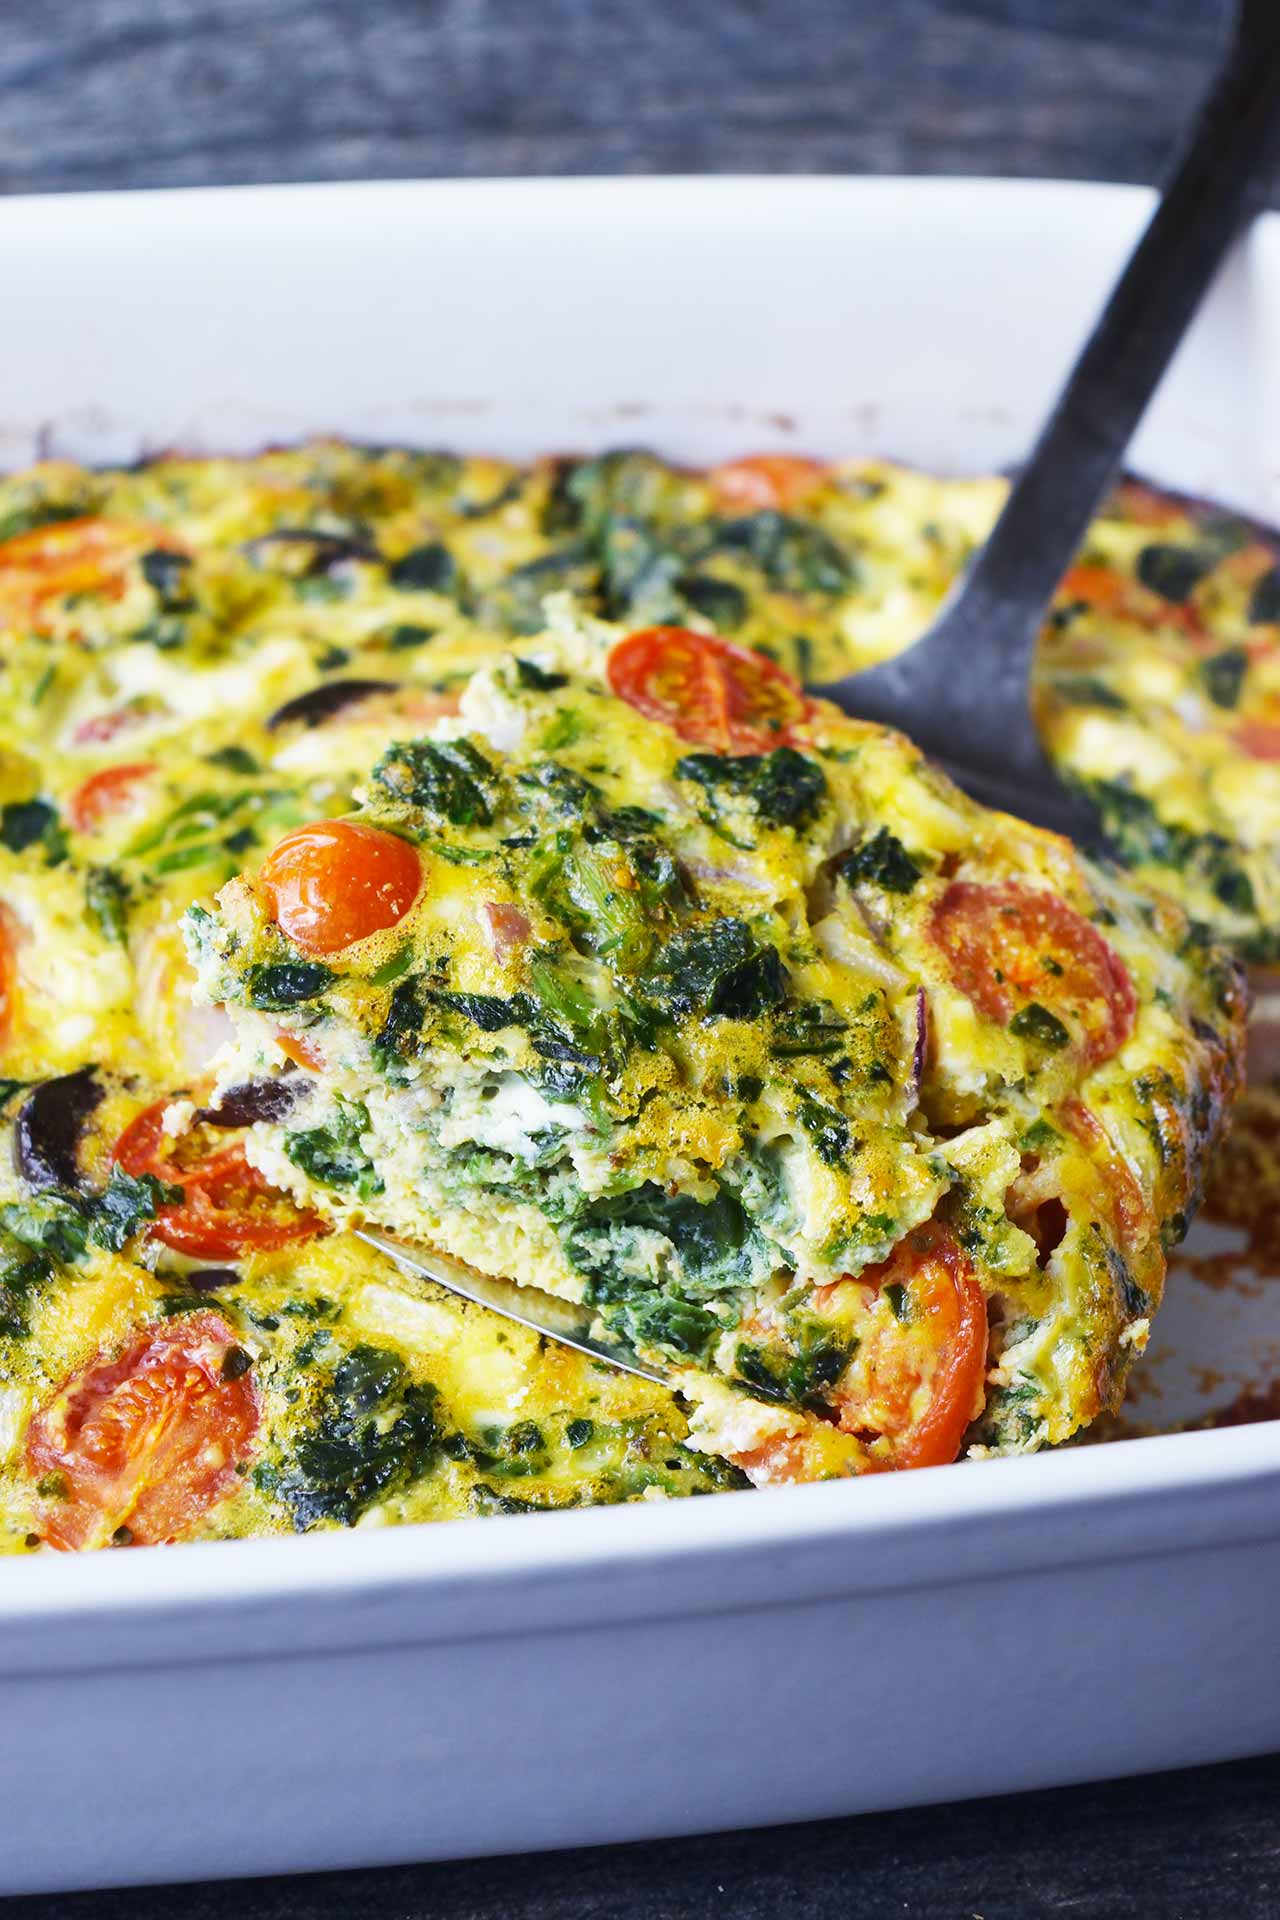 A metal spatula holds a serving of spinach quiche over the casserole dish it was taken from.